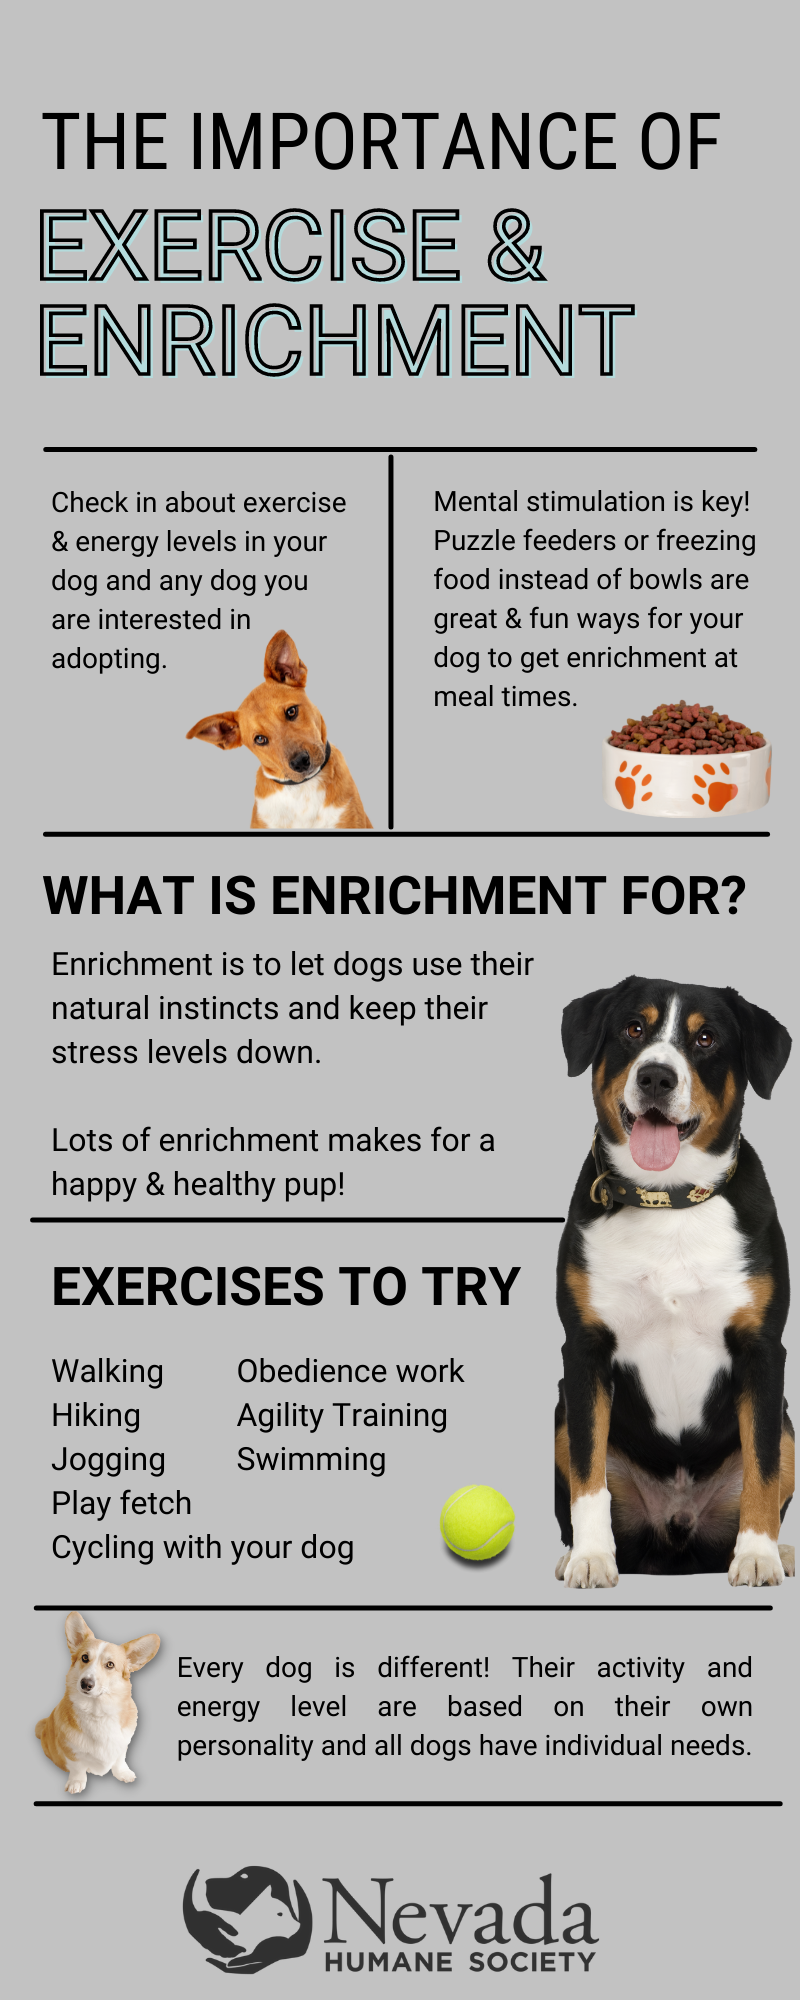 NFR Maine - Canine Enrichment is so important for dogs of